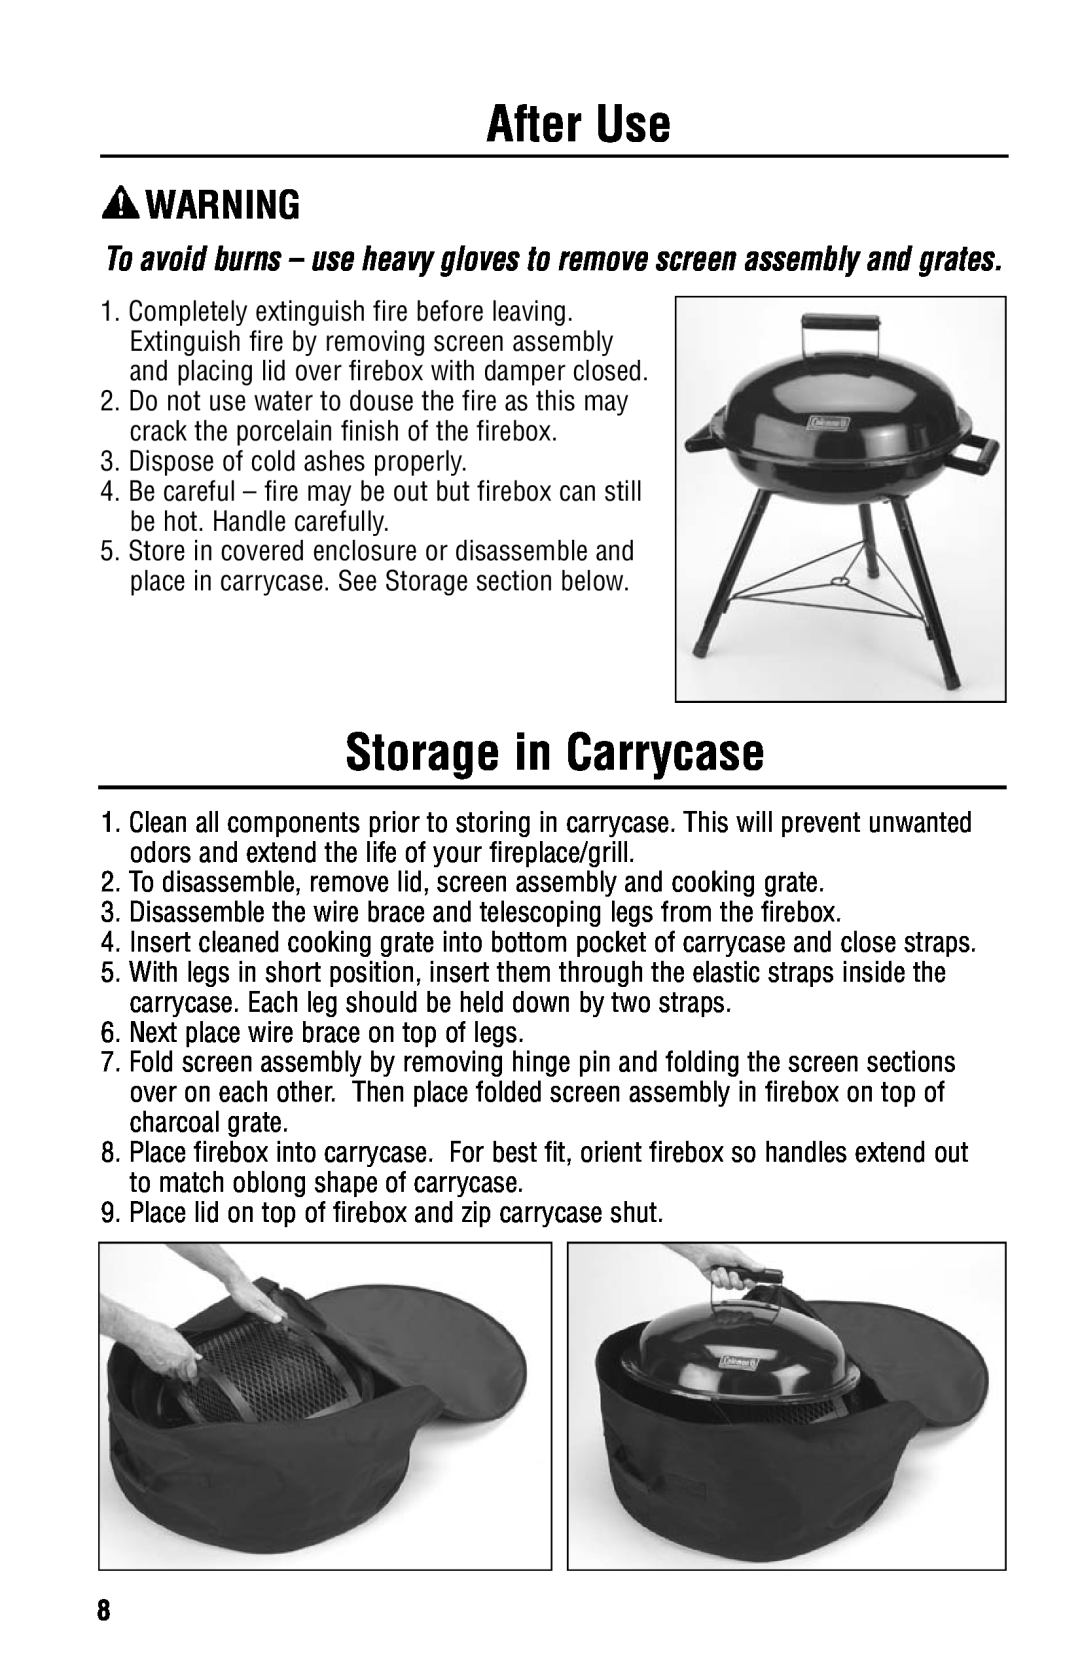 Coleman 5065-705 instruction manual After Use, Storage in Carrycase 